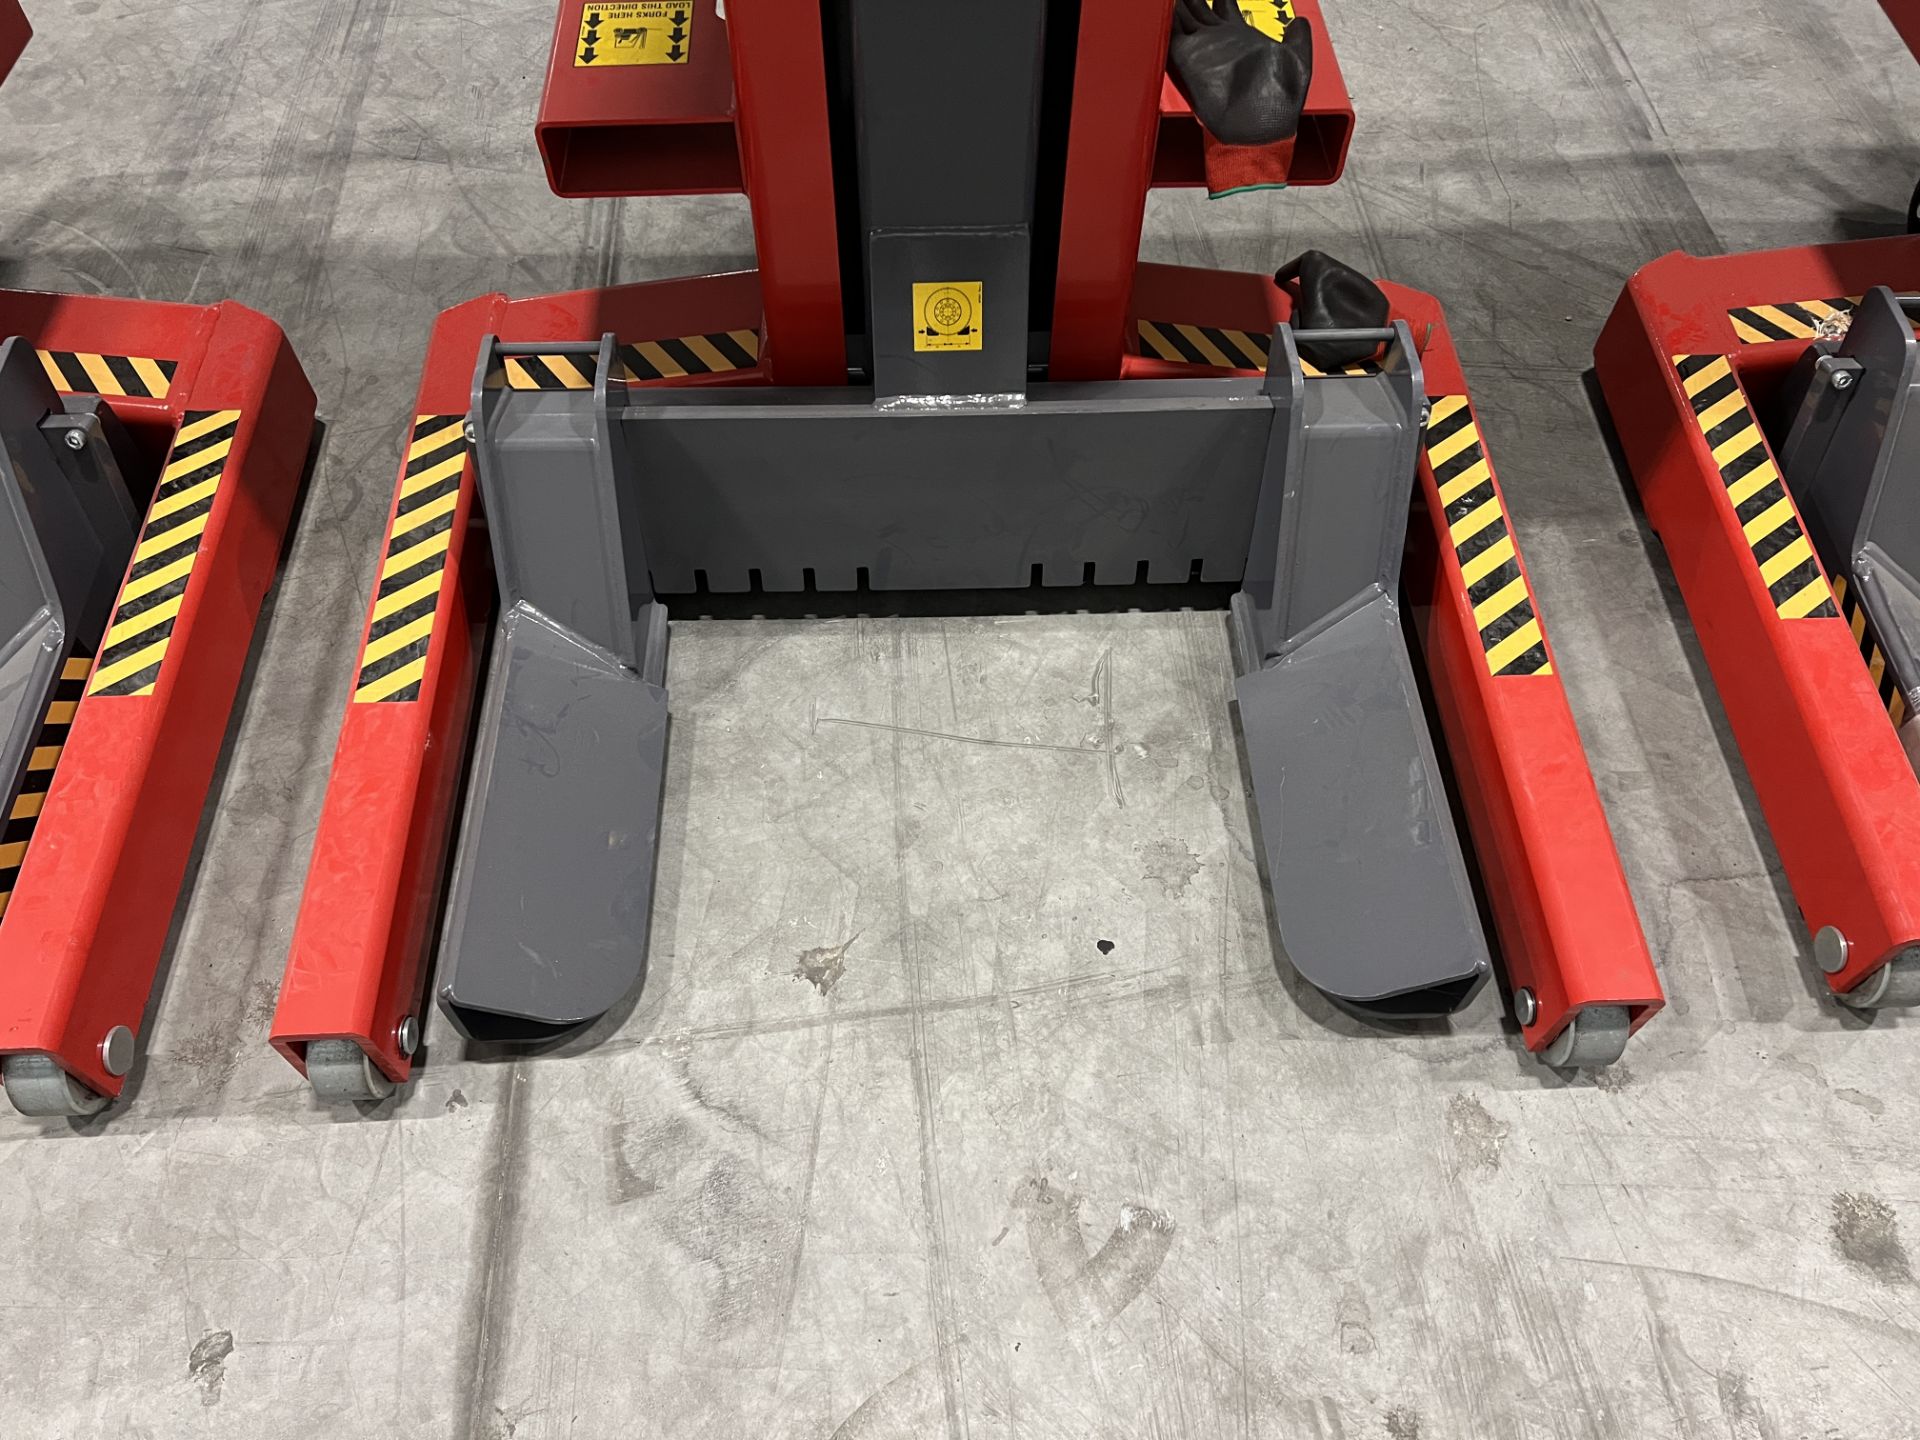 Qty 4, Totalkare T8DC cable free mobile column vehicle lifts, S/No. 012240/4, 012240/3, 012240/2, - Image 8 of 17